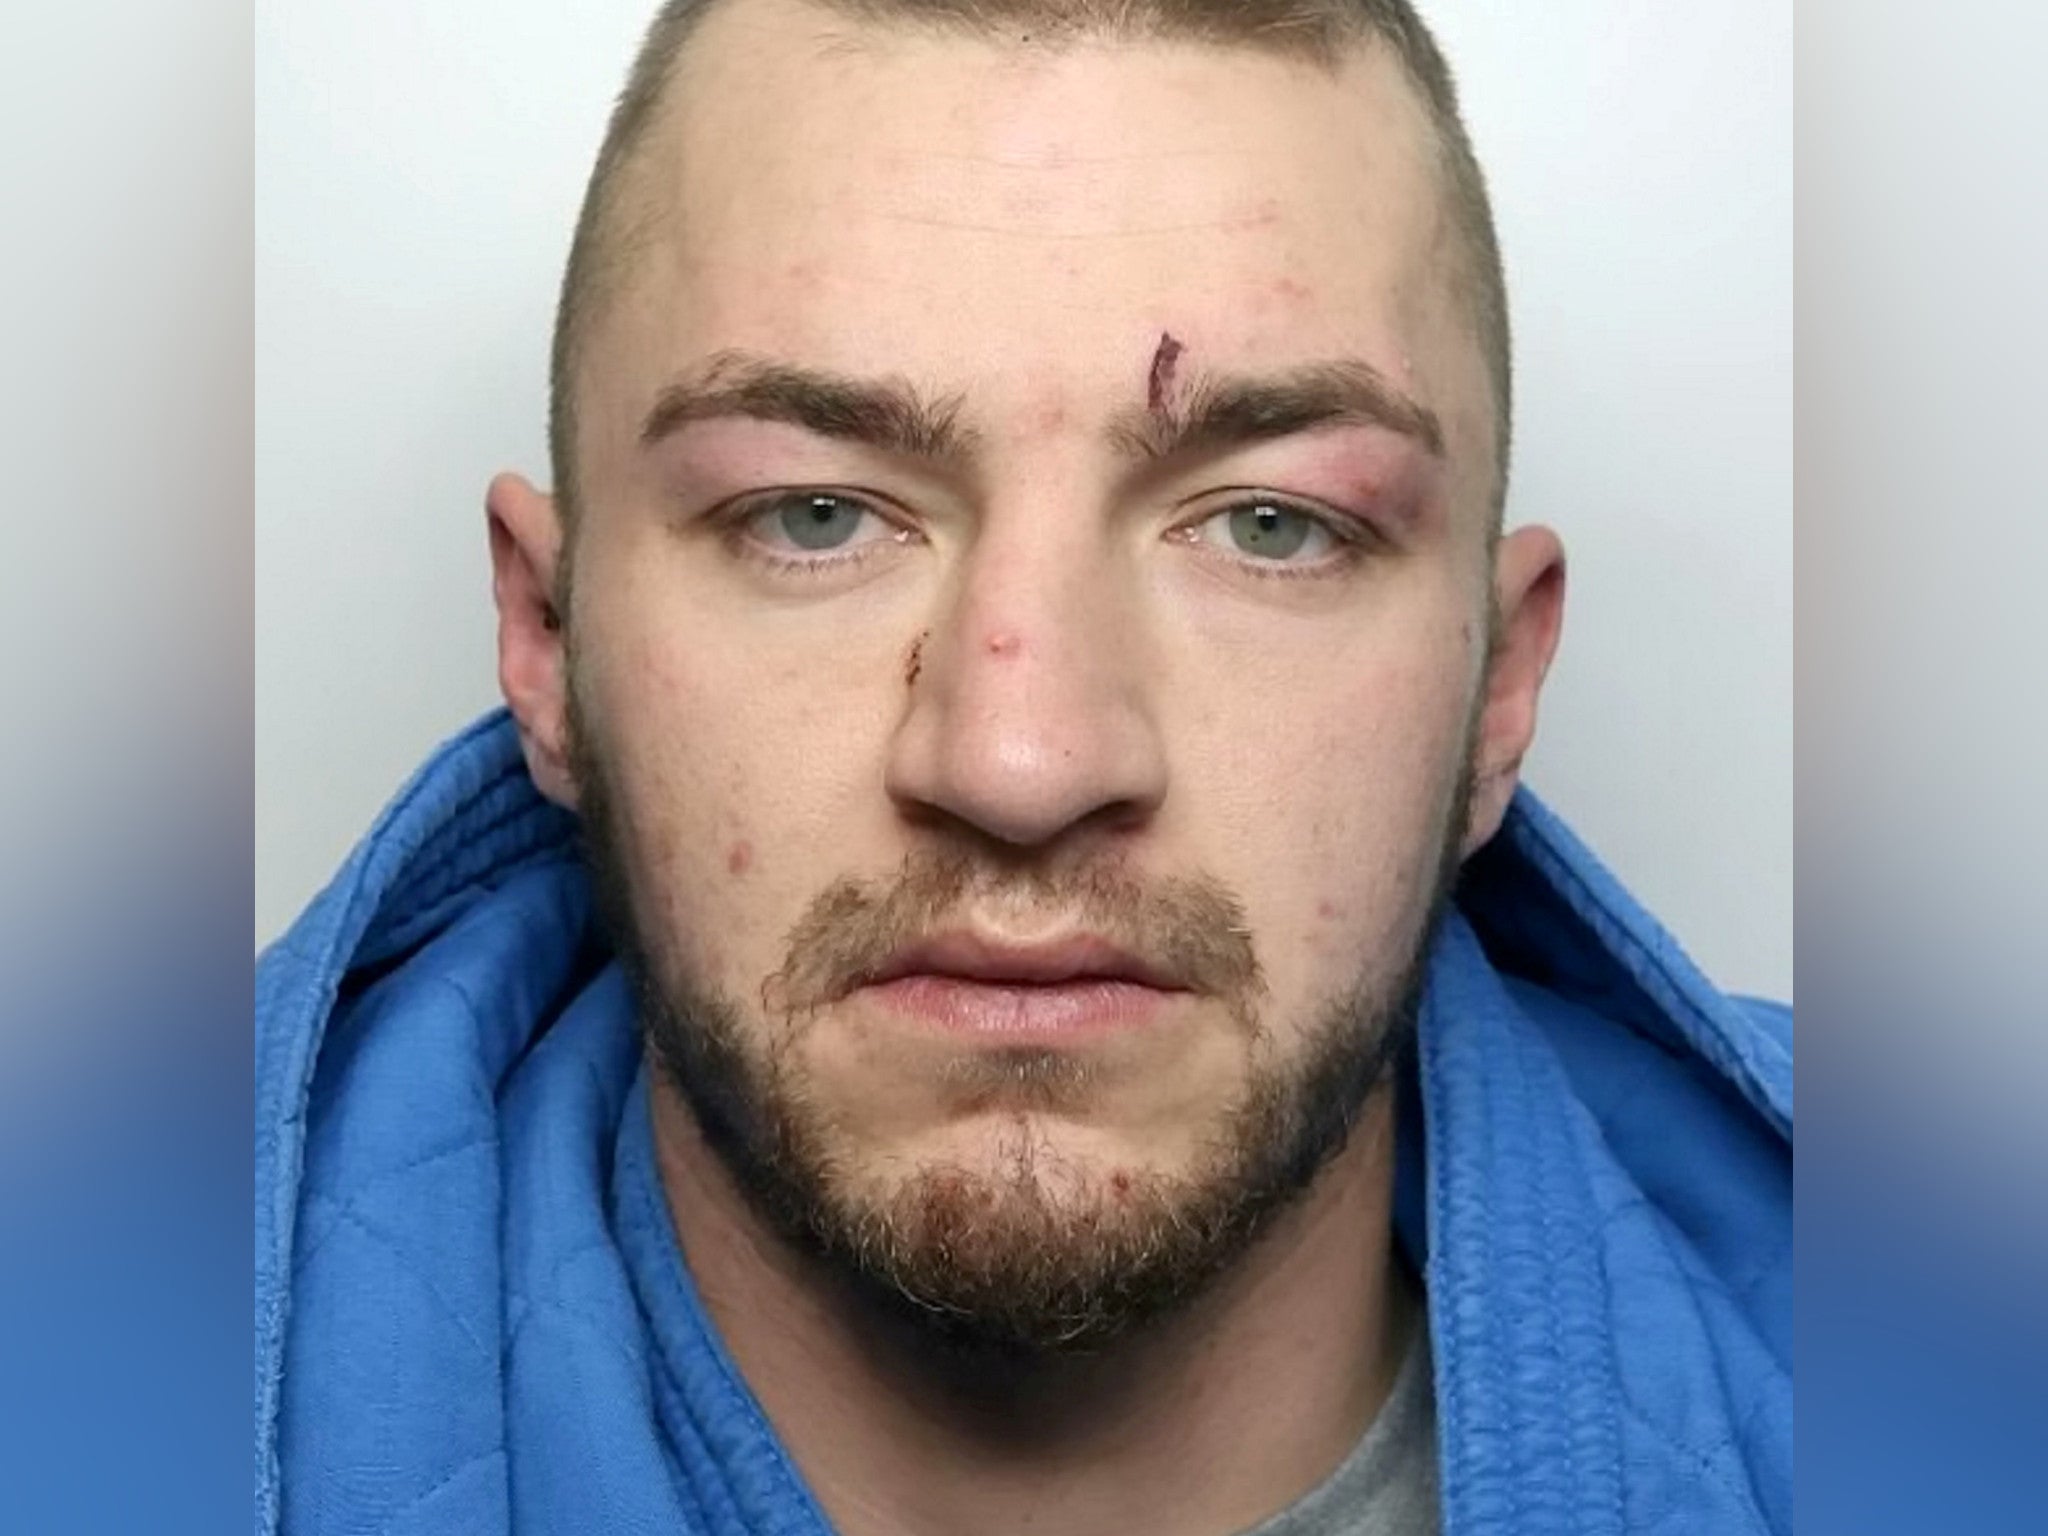 Aaron Booth was jailed for 14 years for a 'sustained' and brutal attack